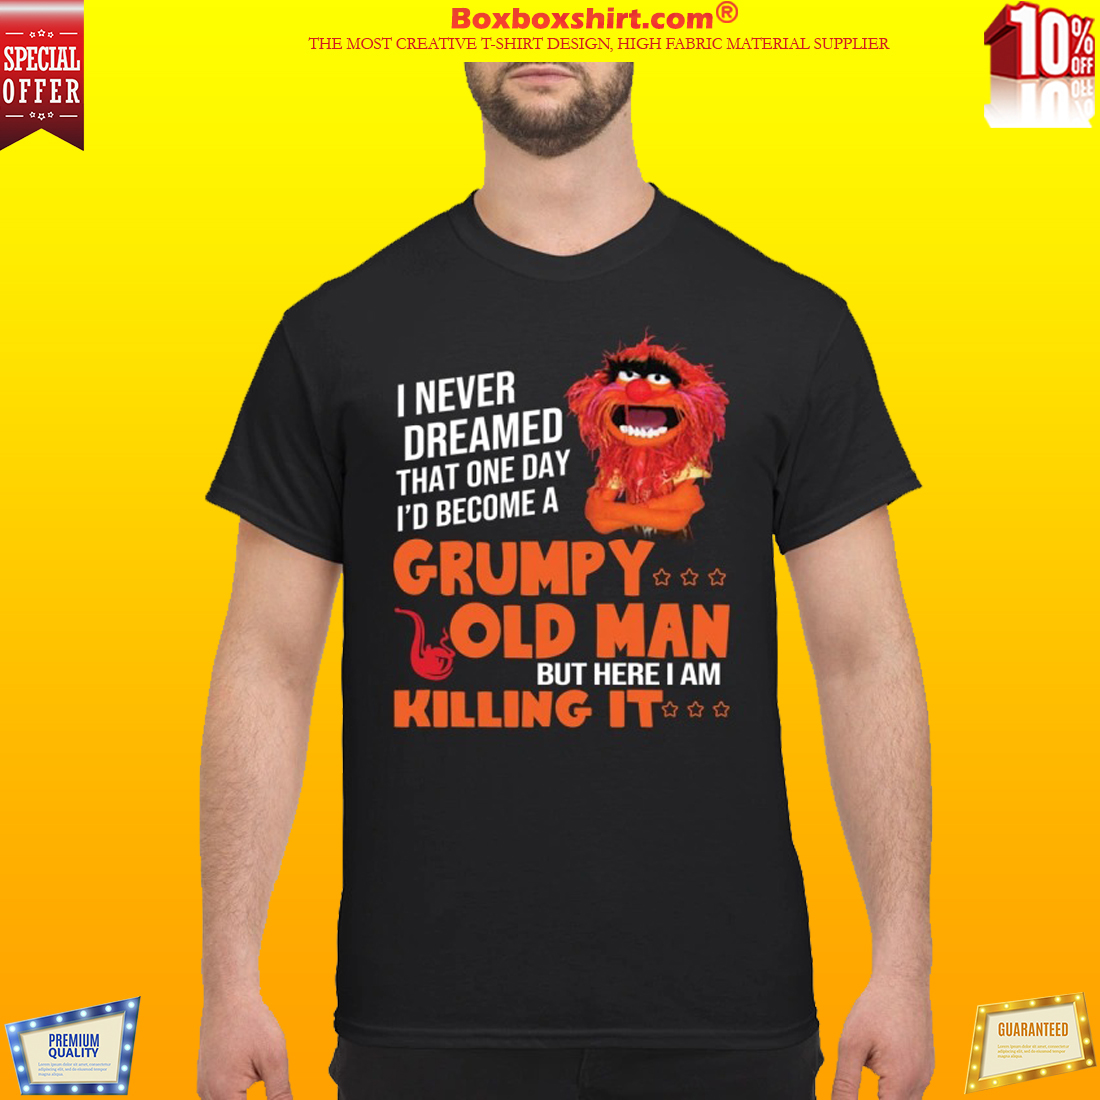 I never dream become Grumpy old man killing it shirt and shirt